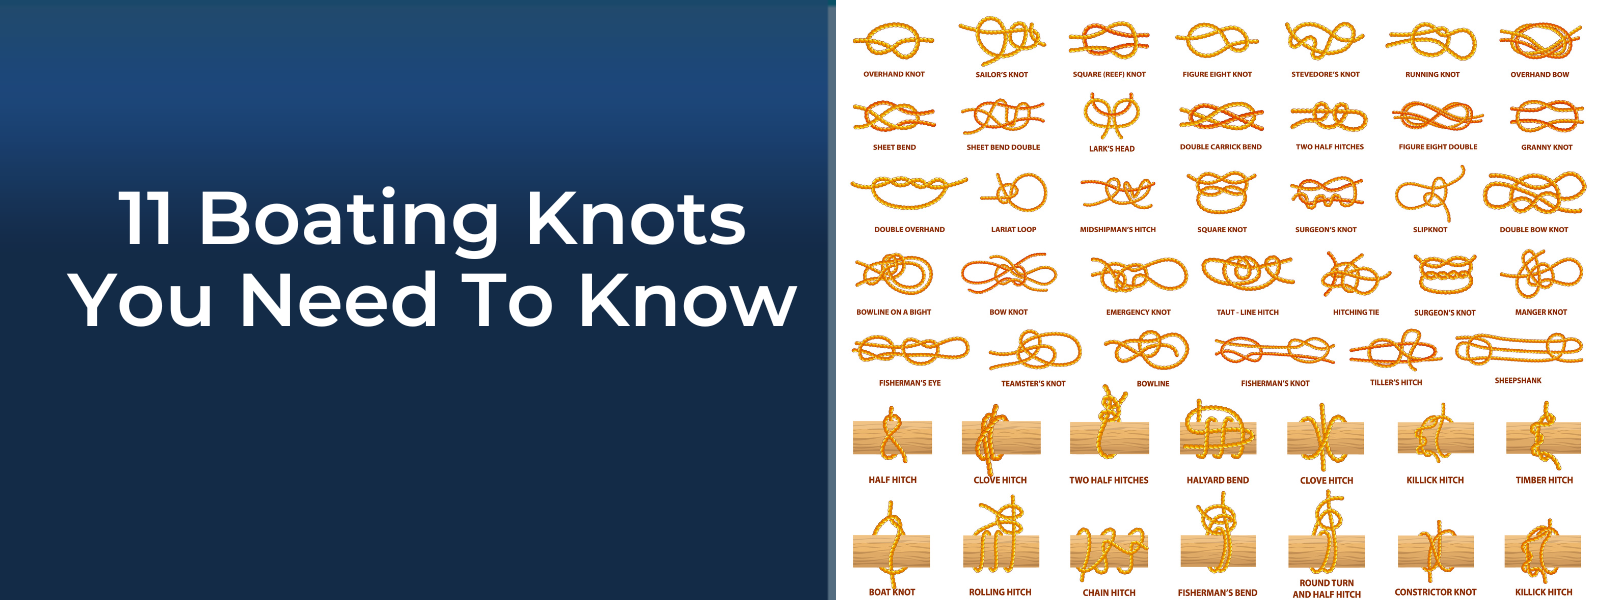 nautical-knots-for-sailing-and-boating